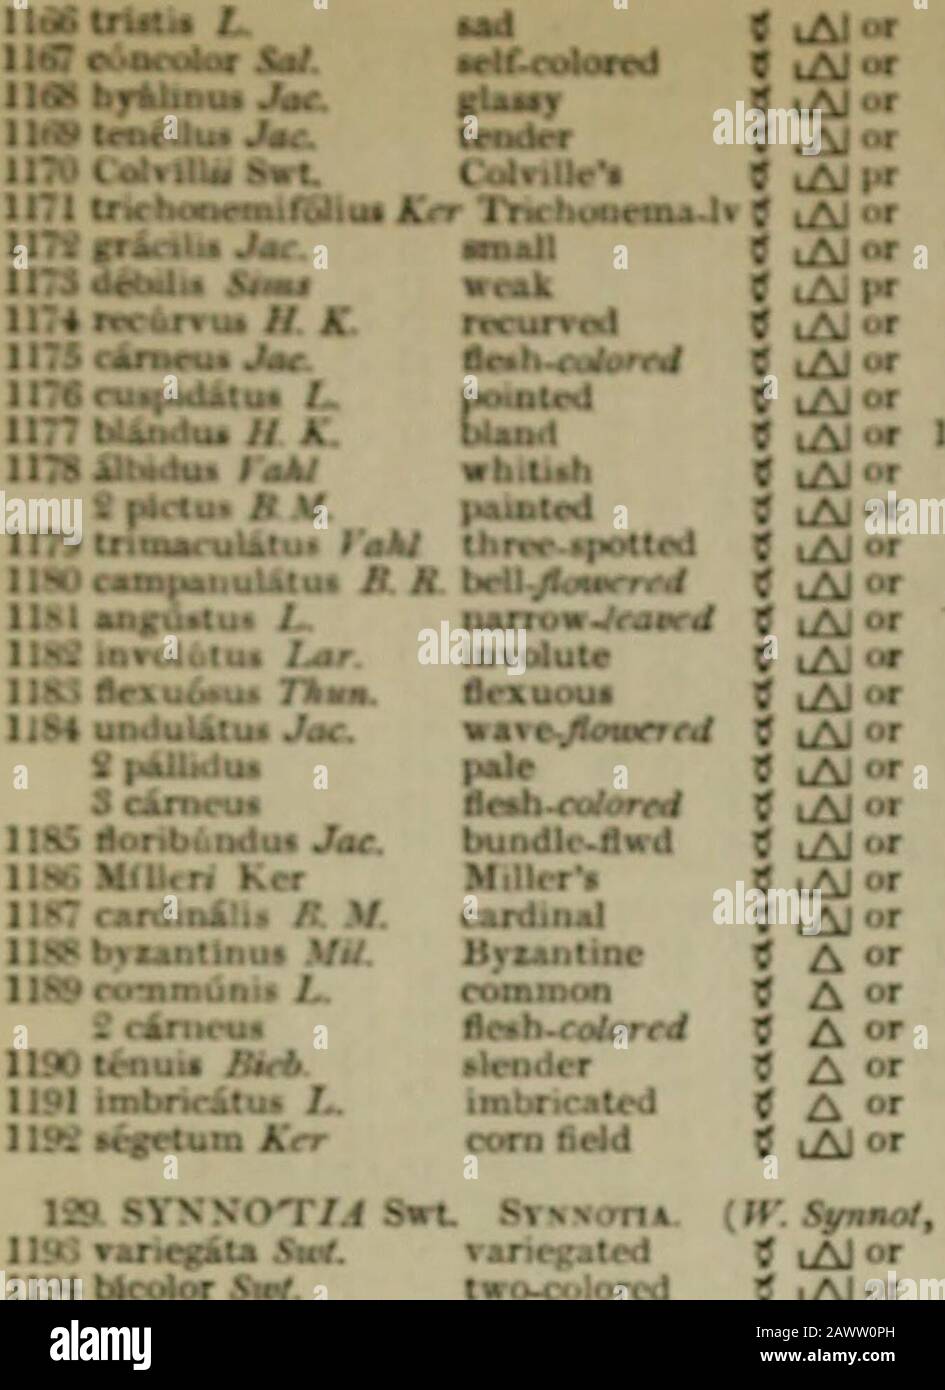 Loudon's Hortus britannicus : a catalogue of all the plants indigenous, cultivated in, or introduced to BritainPart IThe Linnaean arrangement : part IIThe Jussieuean arrangement . issS inv in Lv t*. li. H. 17.^. I) ».p I Hot. mag. «io2H my jn Pk I. «. H. 17.07. O ».p.l I^^r. di» 2 3I in&gt; jn I) C. If. H. iJftii. O t p l J hun. ir 1. II »p my Pk 1-. li. H. 17ft). O i.p.l .Ur ir 2.1 ap my P.Pk C. G. H. 17t»». I) » p I Bf&gt;t. maR. (.471 «p.my F I . U. H. 17«iu. I) i.p.l Hot. inag. .OJJ 1 my jl l i C. G. H. 17H8. O i.p.l Hot inaR. lilOI| ap.my V C. G. H. 1751. O rp l HJ 2 jLau n.B 1-. O. H. 17 Stock Photo